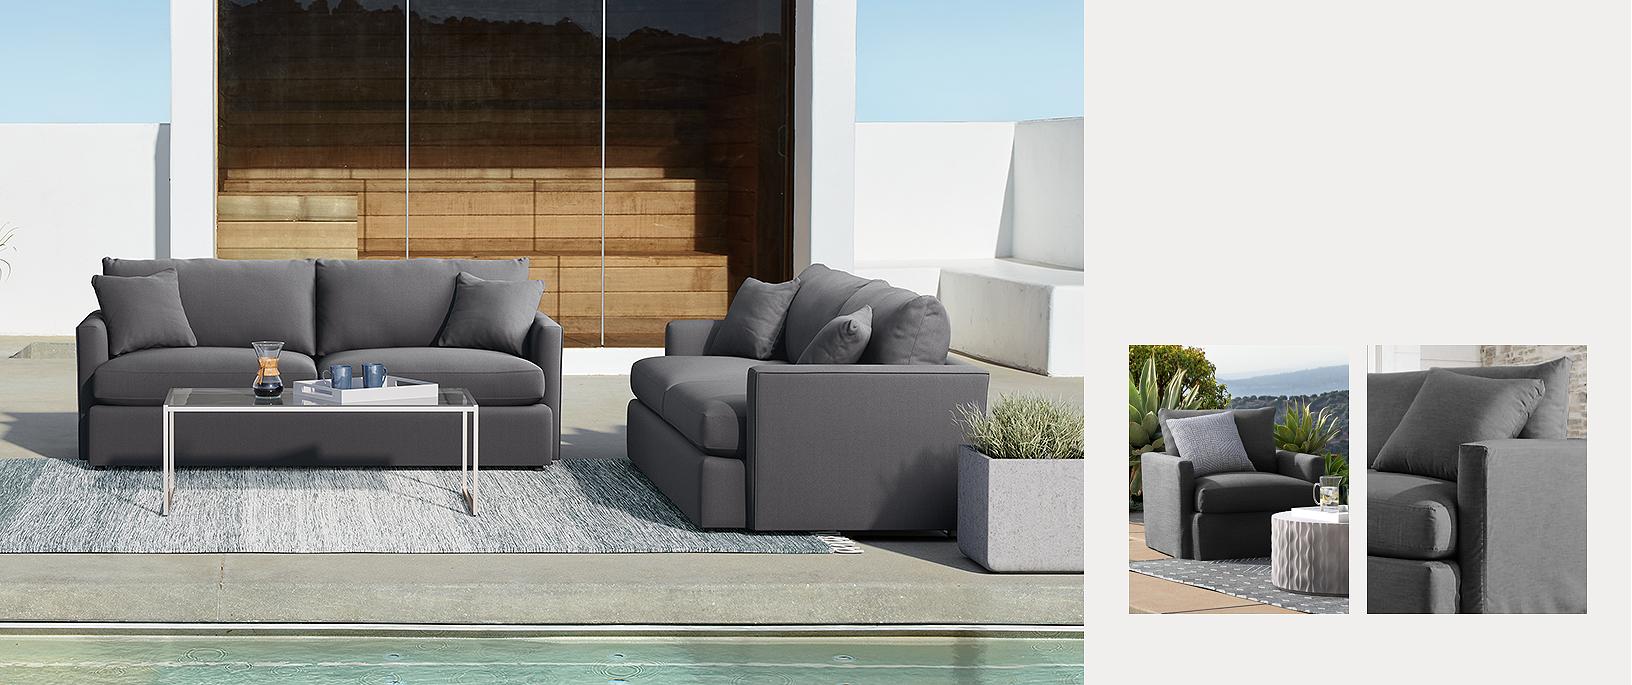 Outdoor Furniture Collections: Dining and Lounge | Crate and Barrel